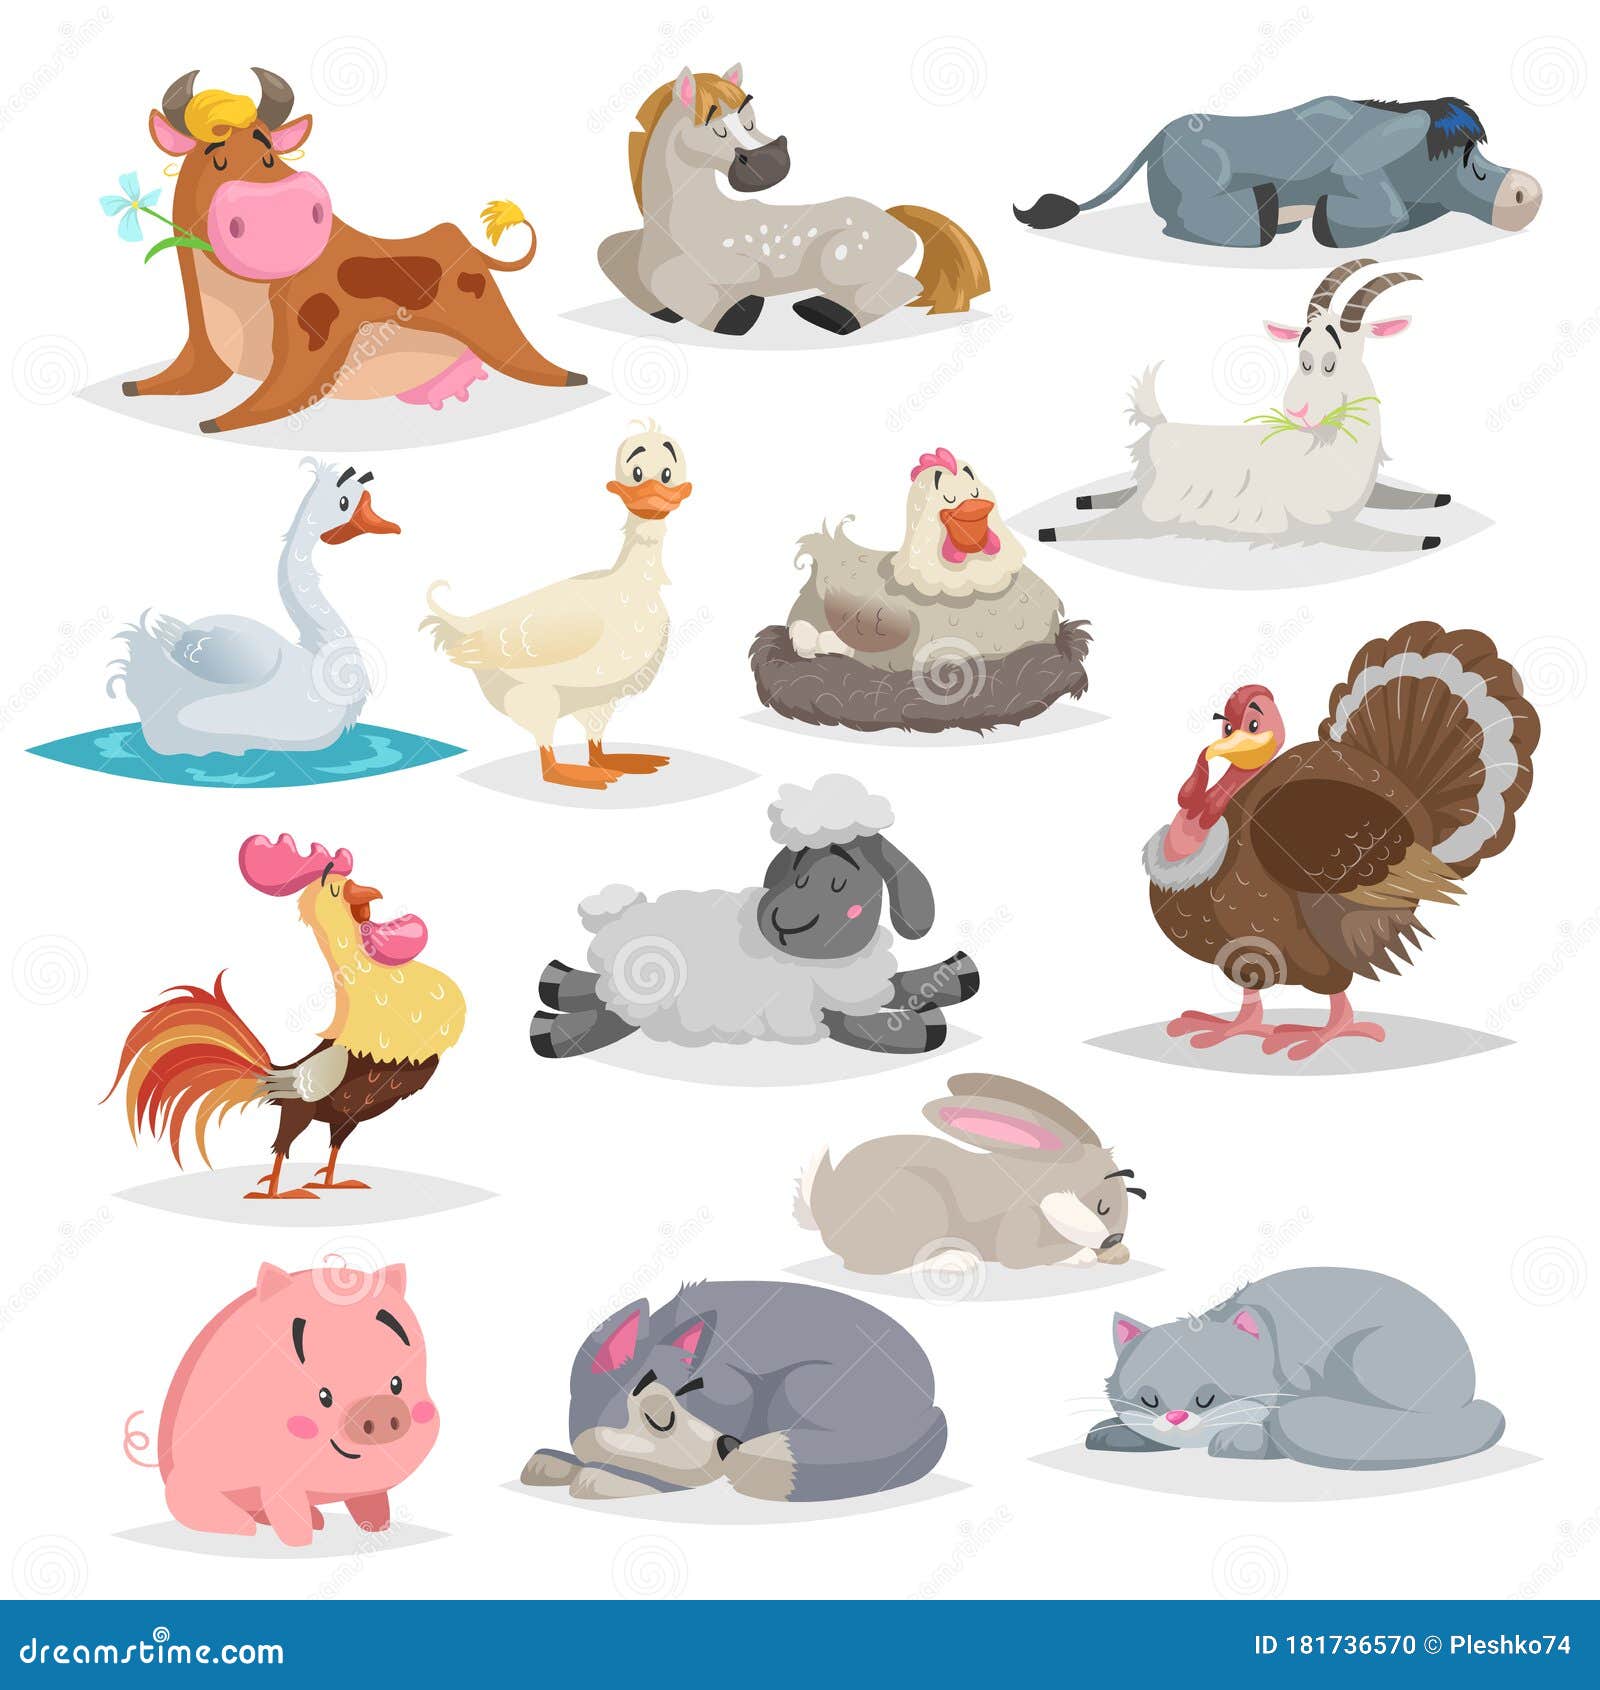 Cute farm animals set. Collection of cartoon vector drawings in flat style. Donkey, goat, horse, sheep, pig, cow, turkey, duck, rooster and hen, goose, dog, cat, rabbit. Various poses. Sleeping animals. Isolated on white background.